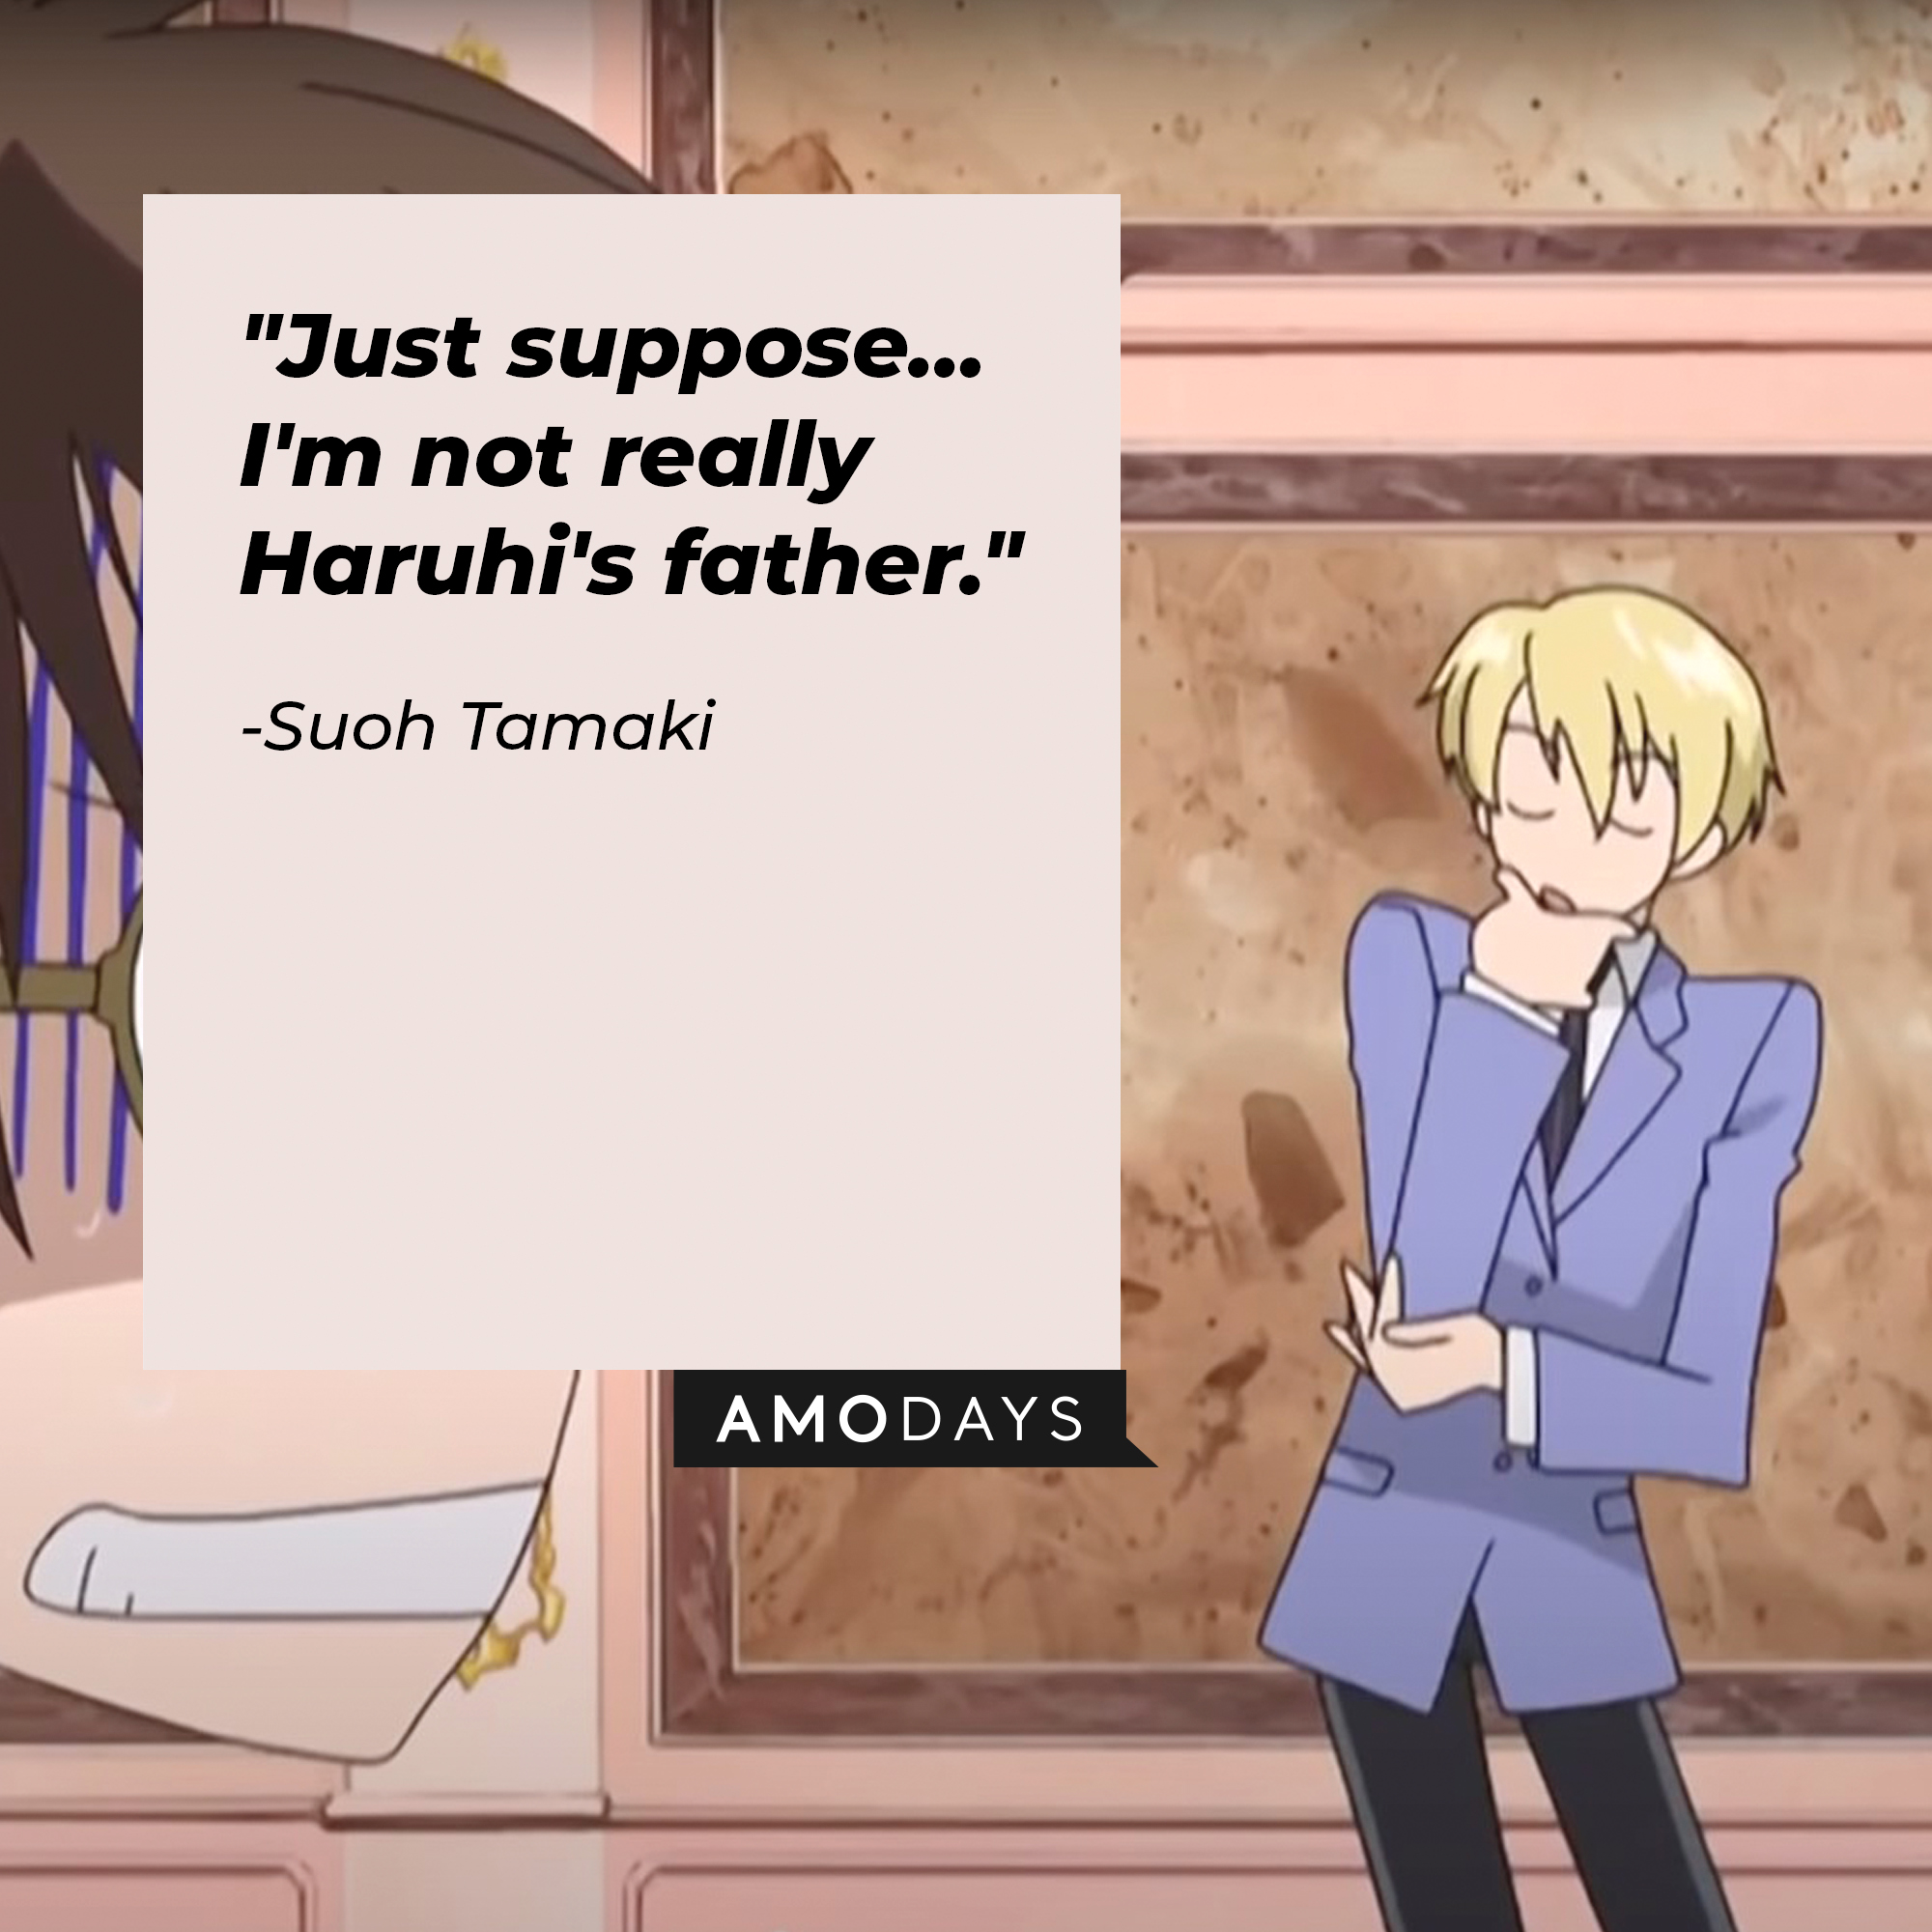 Suoh Tamaki's quote: "Just suppose… I'm not really Haruhi's father." | Source: Facebook.com/theouranhostclub